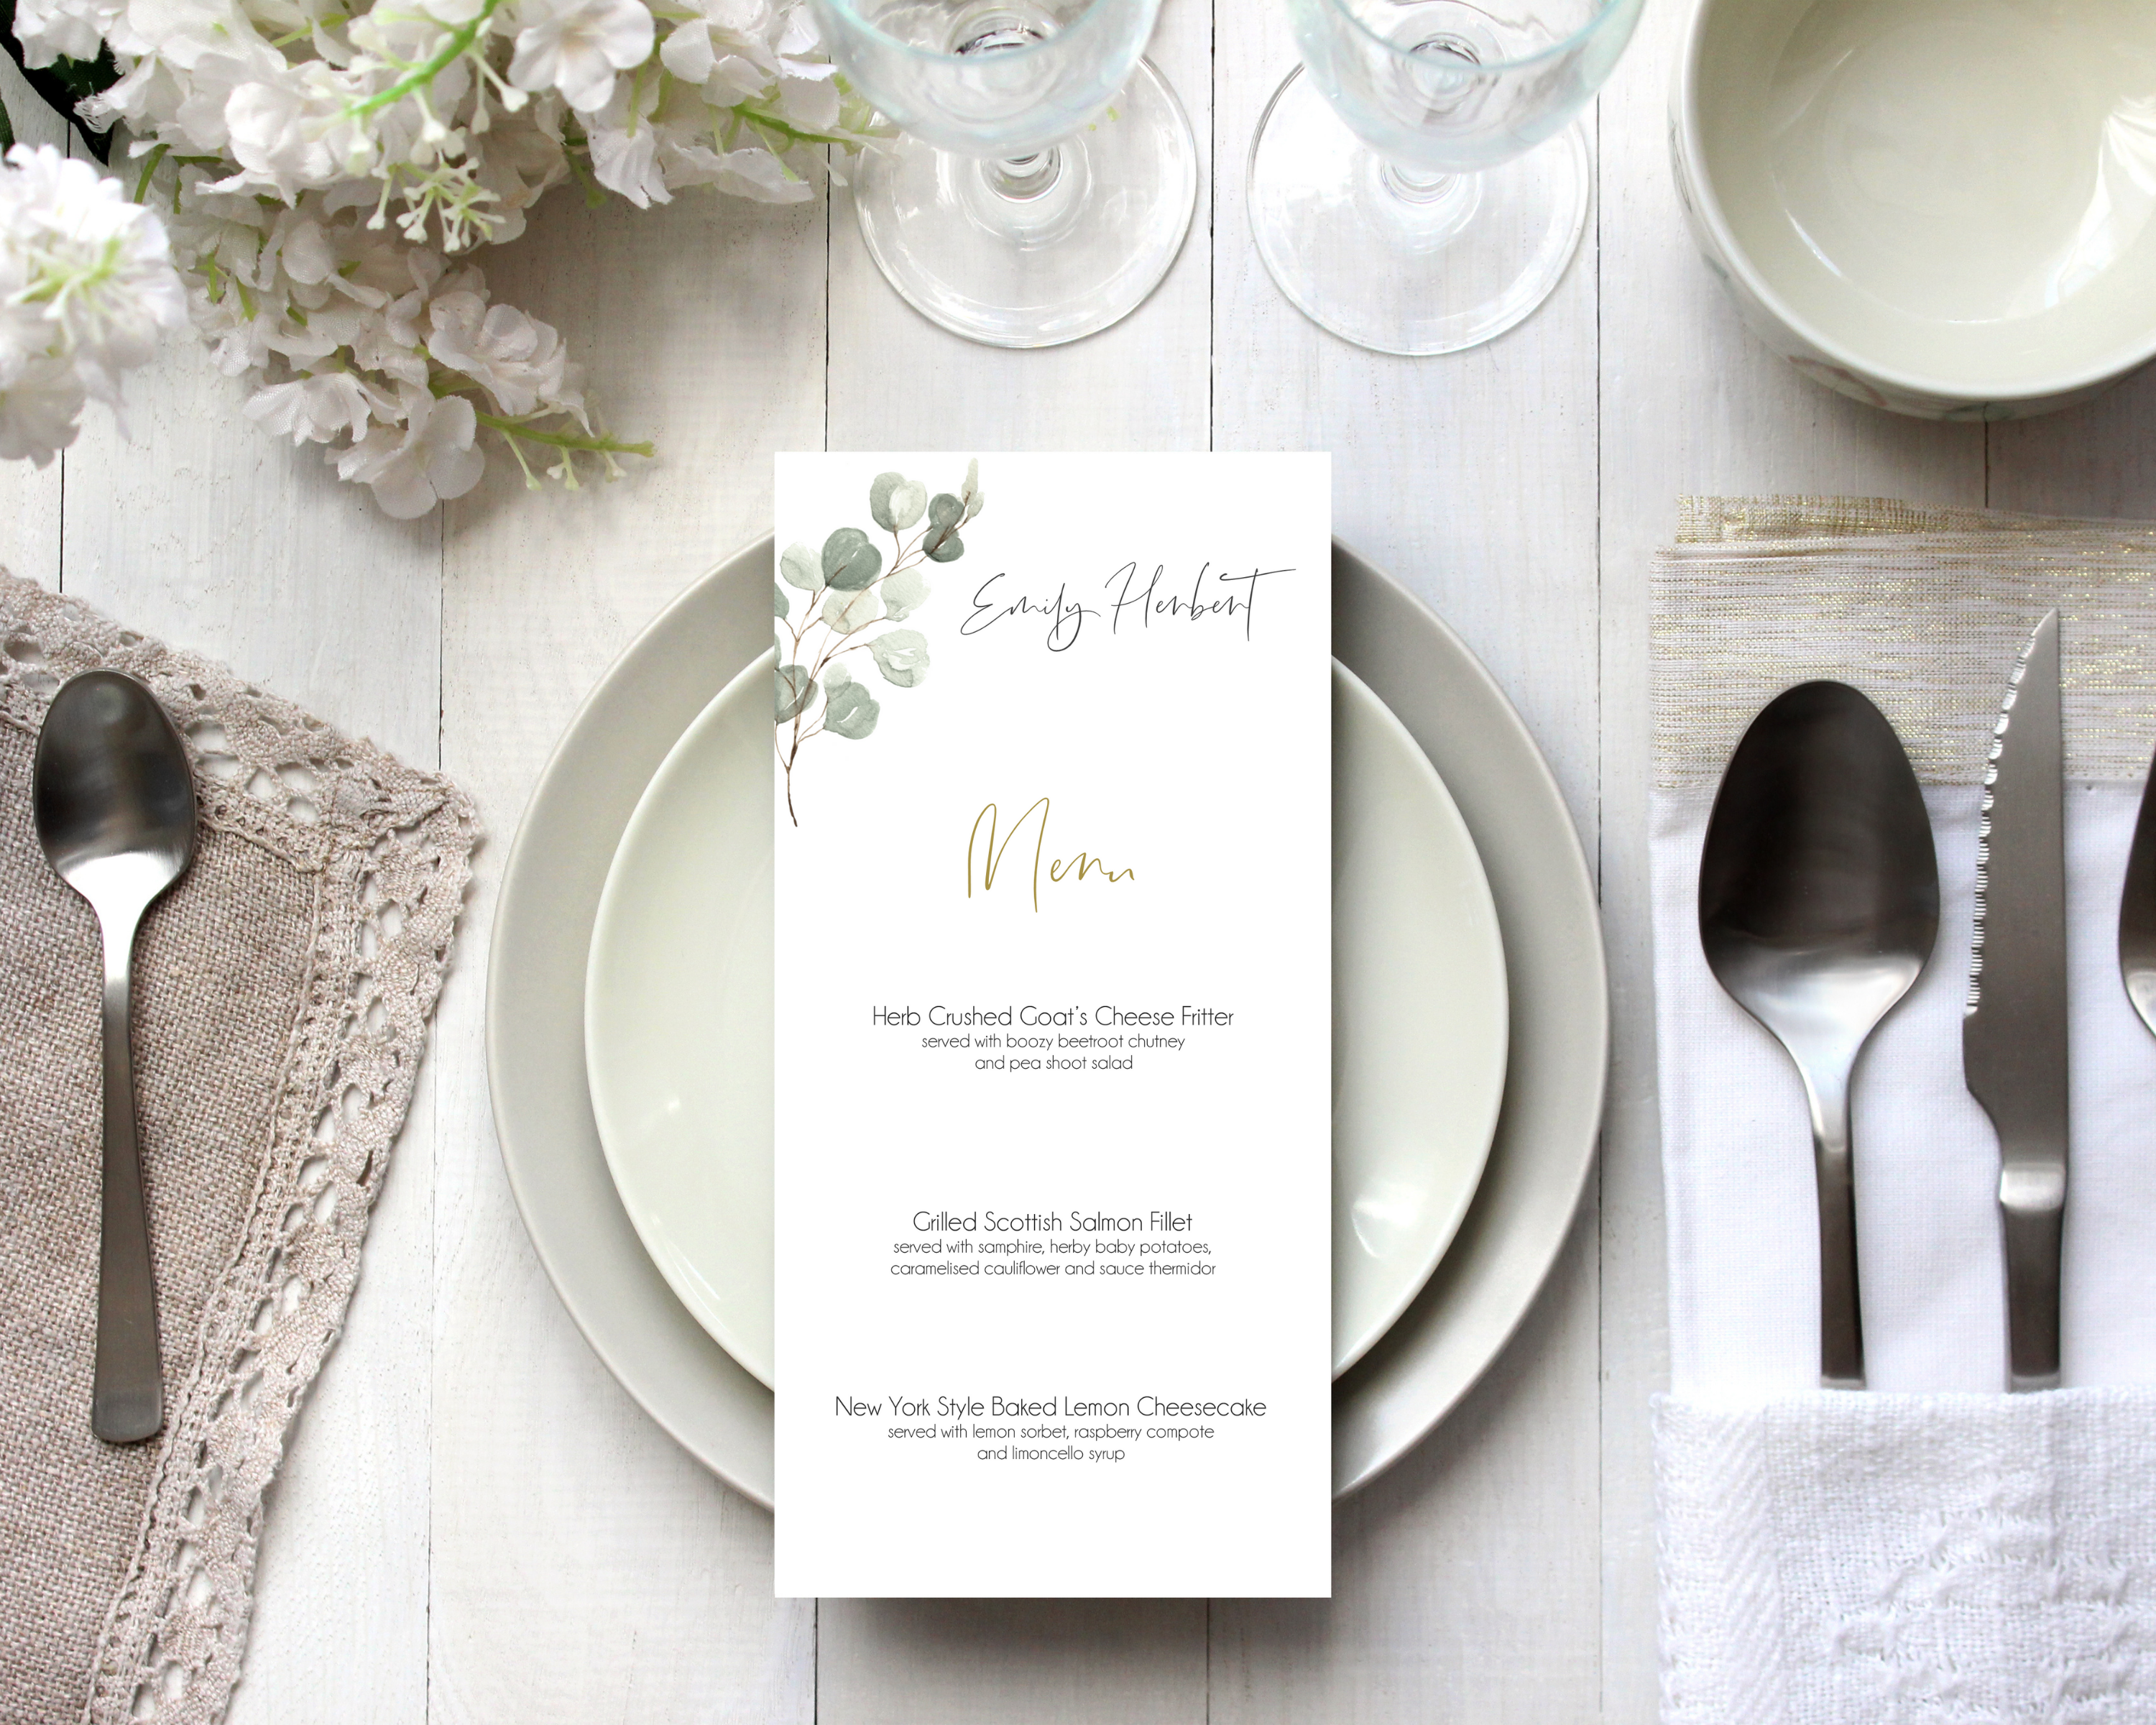 A Poppleberry muted green eucalyptus wedding menu card, printed with 3-course dinner menu, laid on dining table with cutlery and glasses.